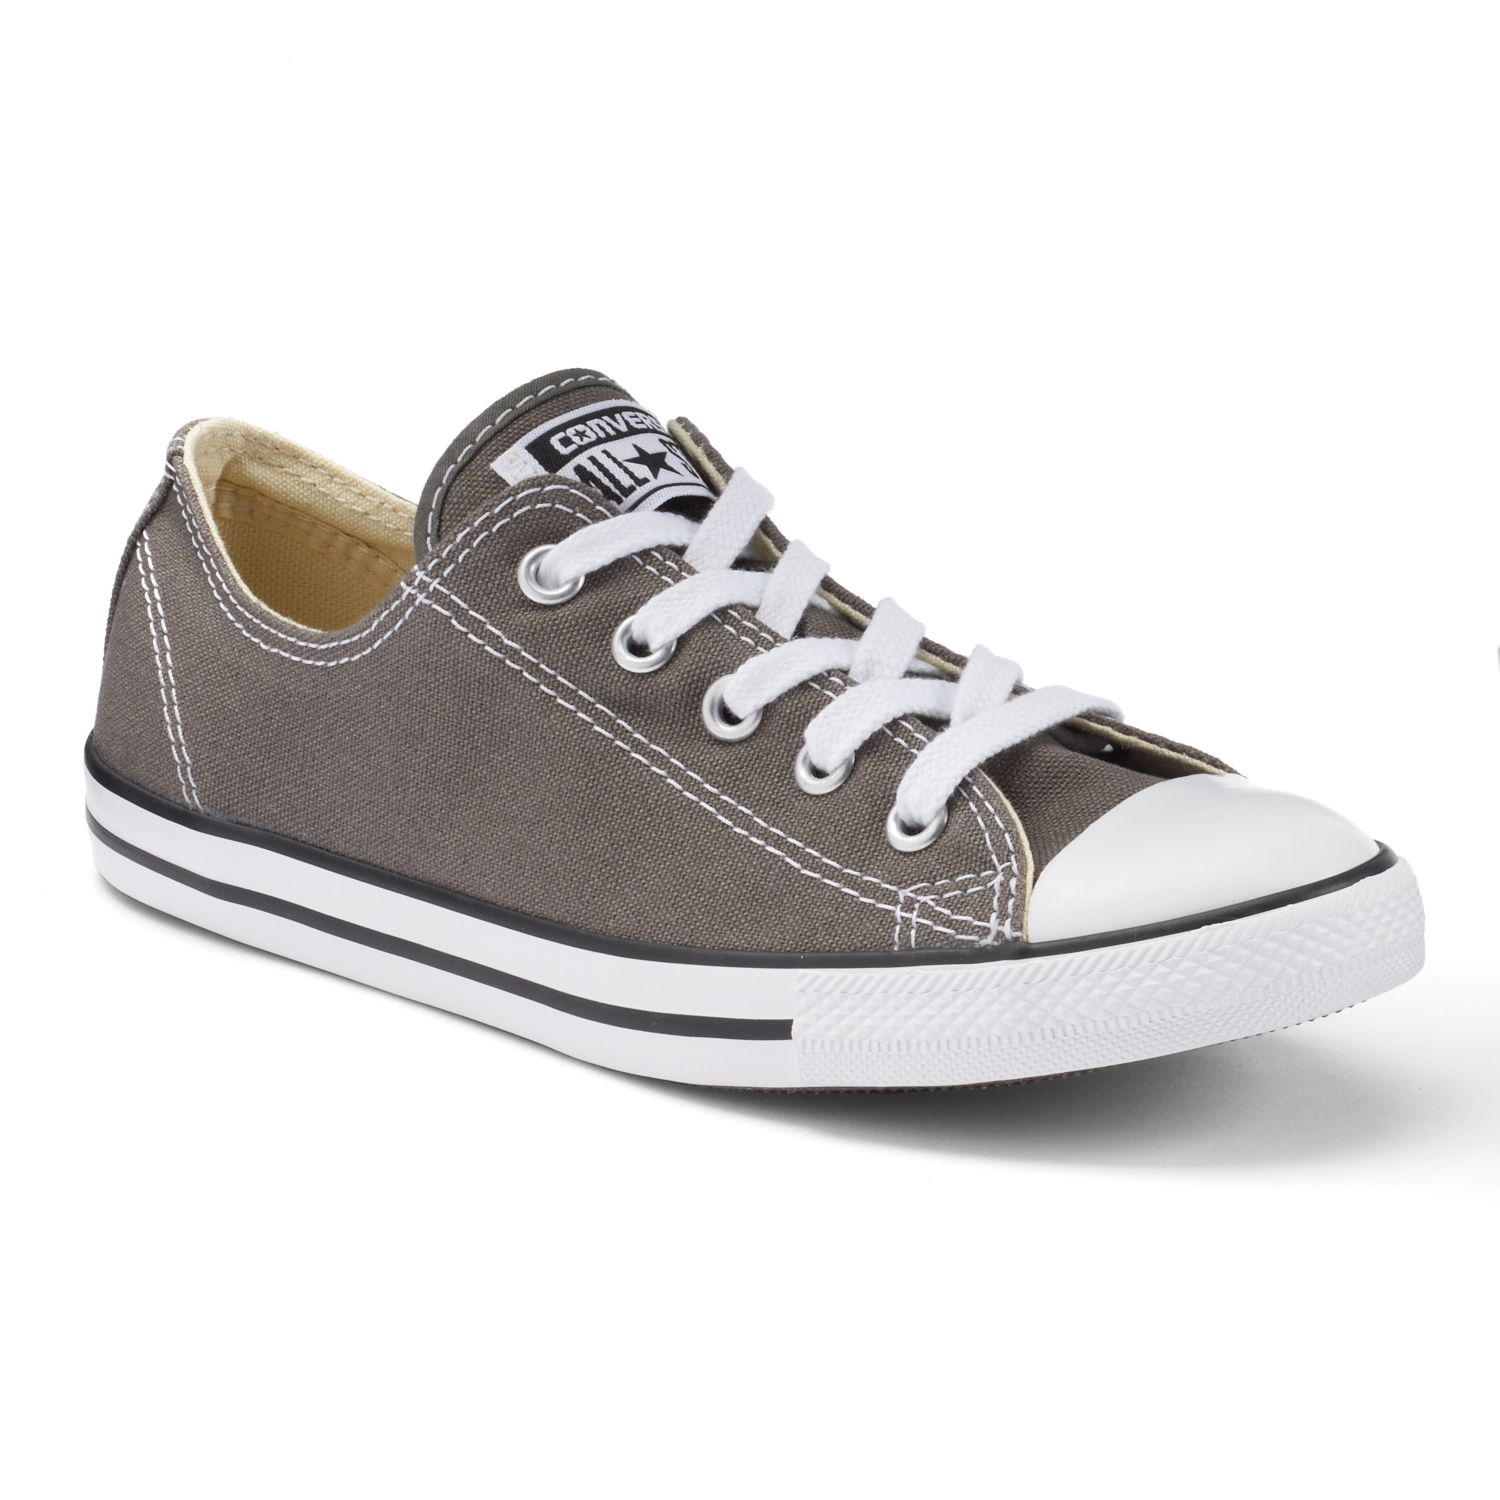 converse chuck taylor all star dainty trainers in beige